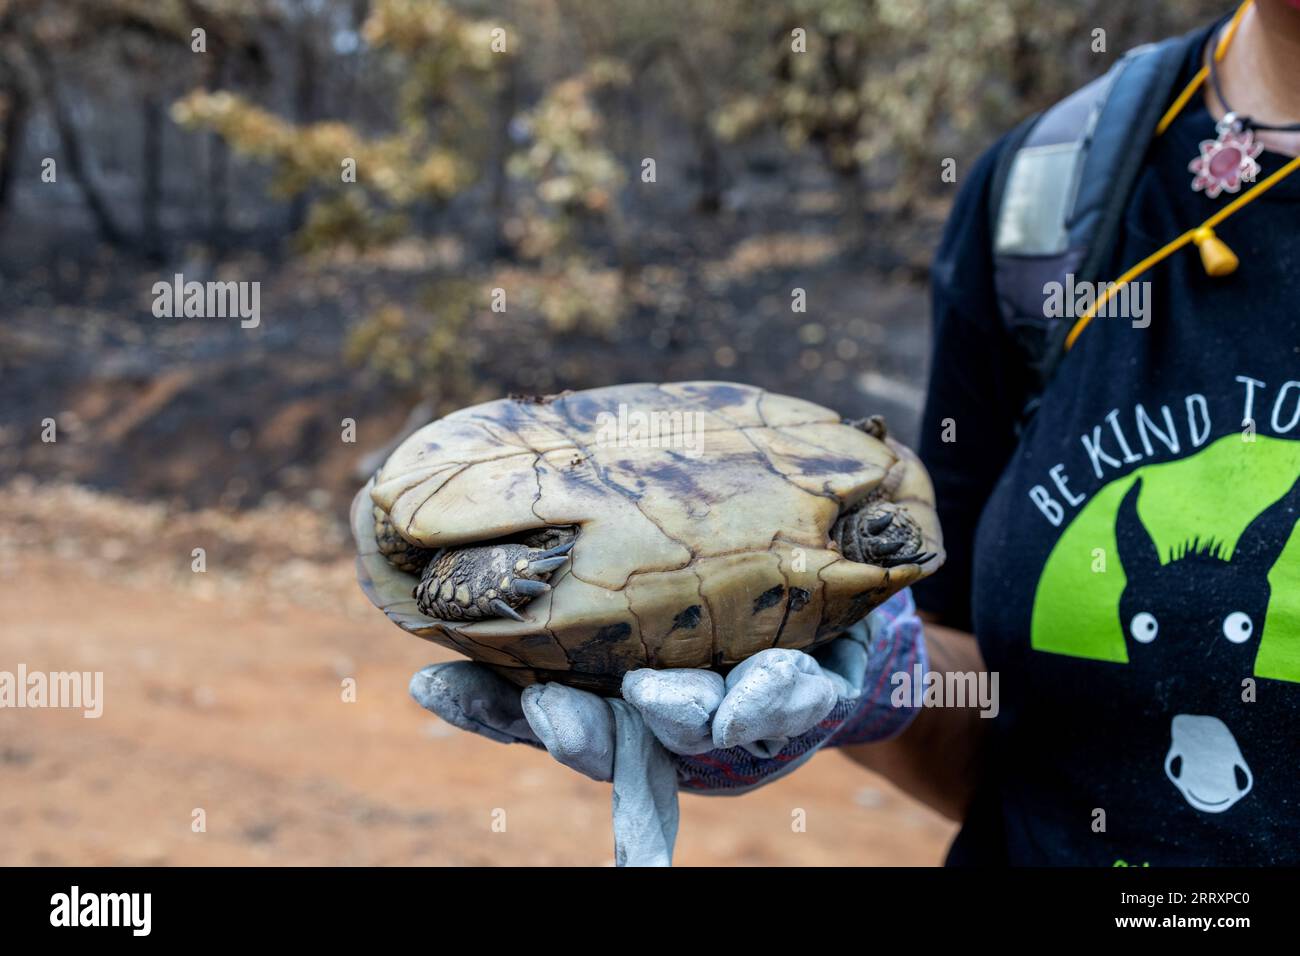 Looking for the surviving wild animals like turtle after the catastrophic wildfires, environmental and ecological disaster Stock Photo